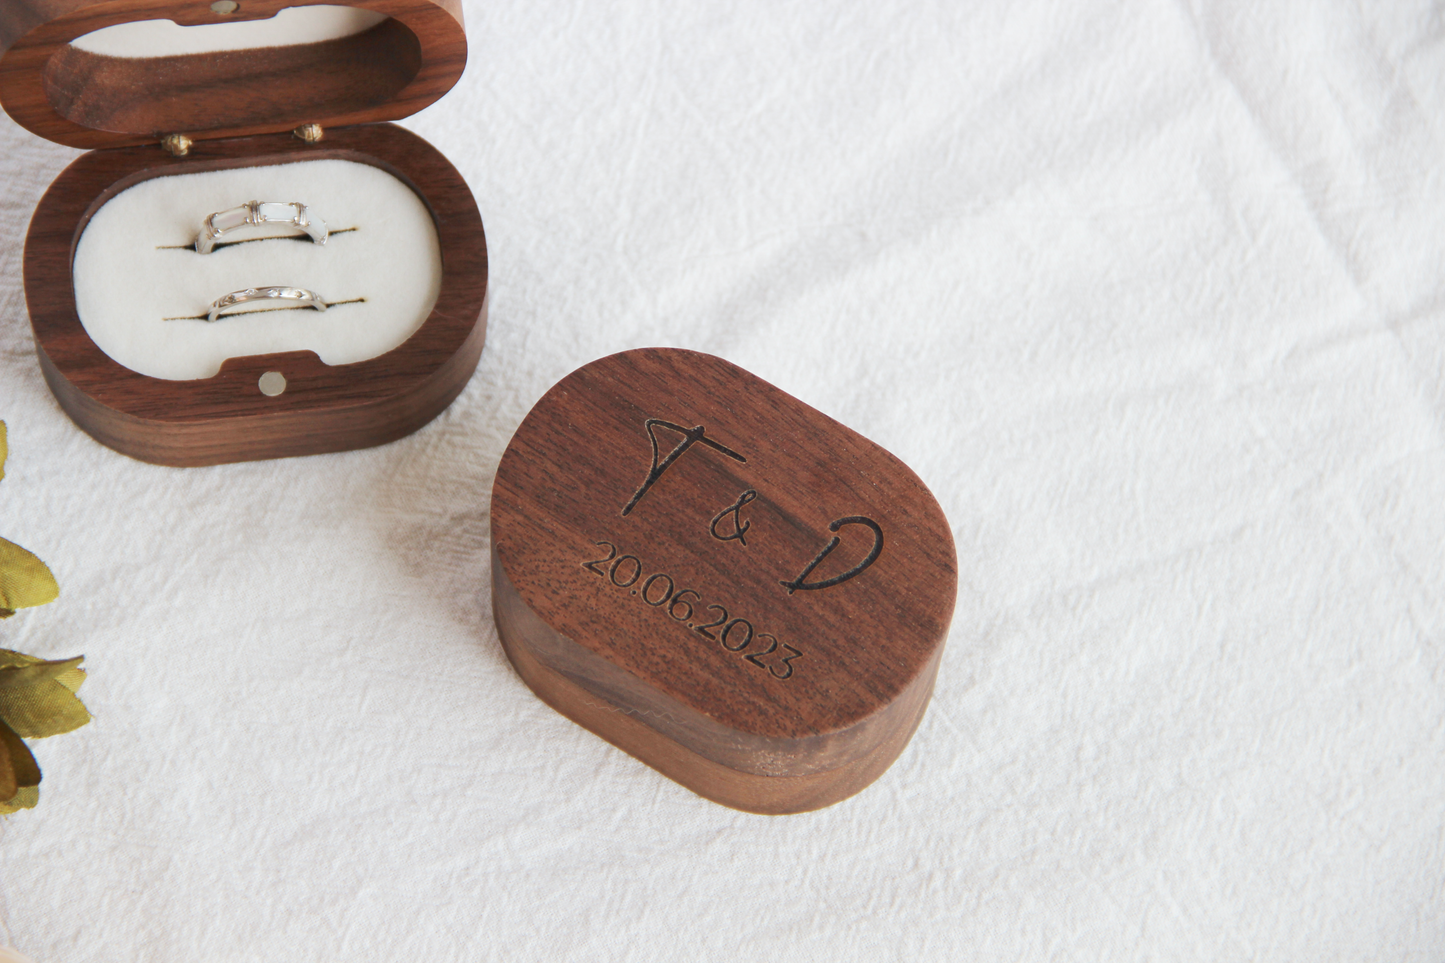 Charming Walnut Wedding Ring Box - Compact Luxury for Your Cherished Moment